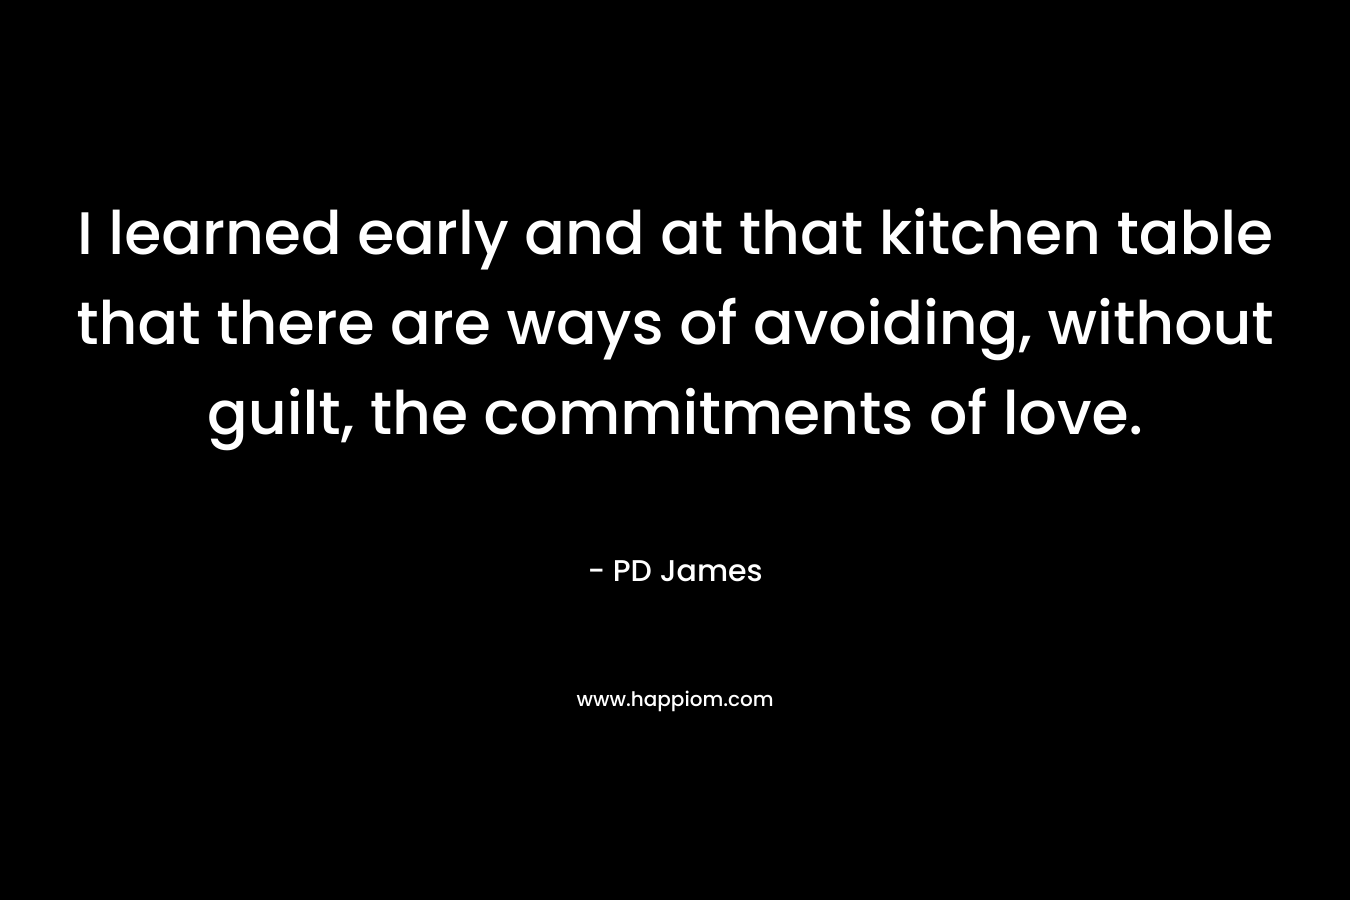 I learned early and at that kitchen table that there are ways of avoiding, without guilt, the commitments of love. – PD James